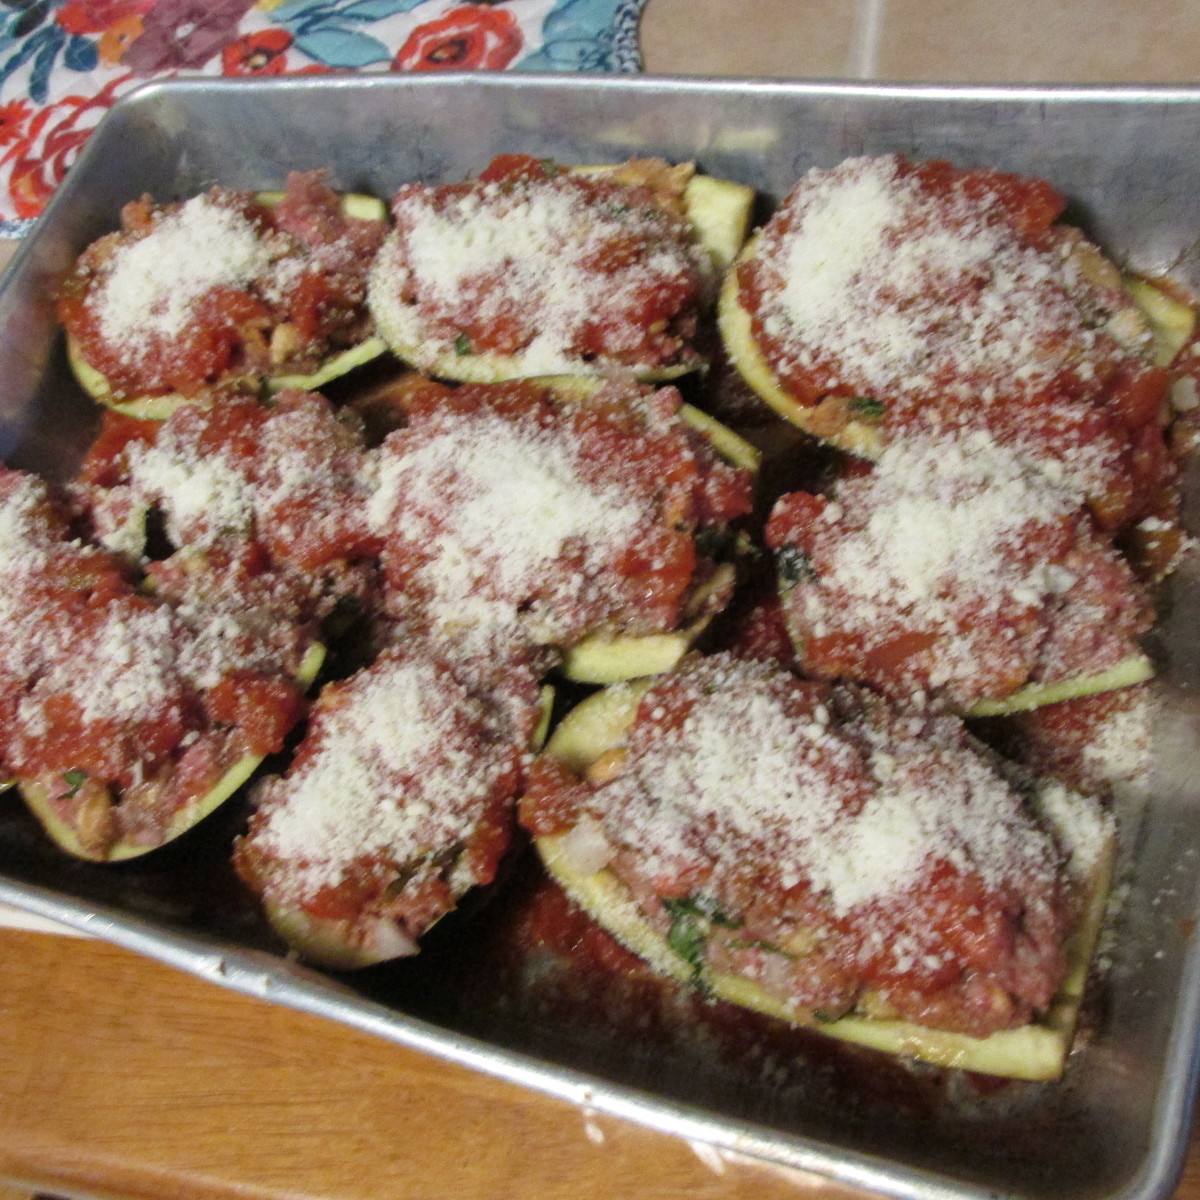 Stuffed eggplant before it is cooked